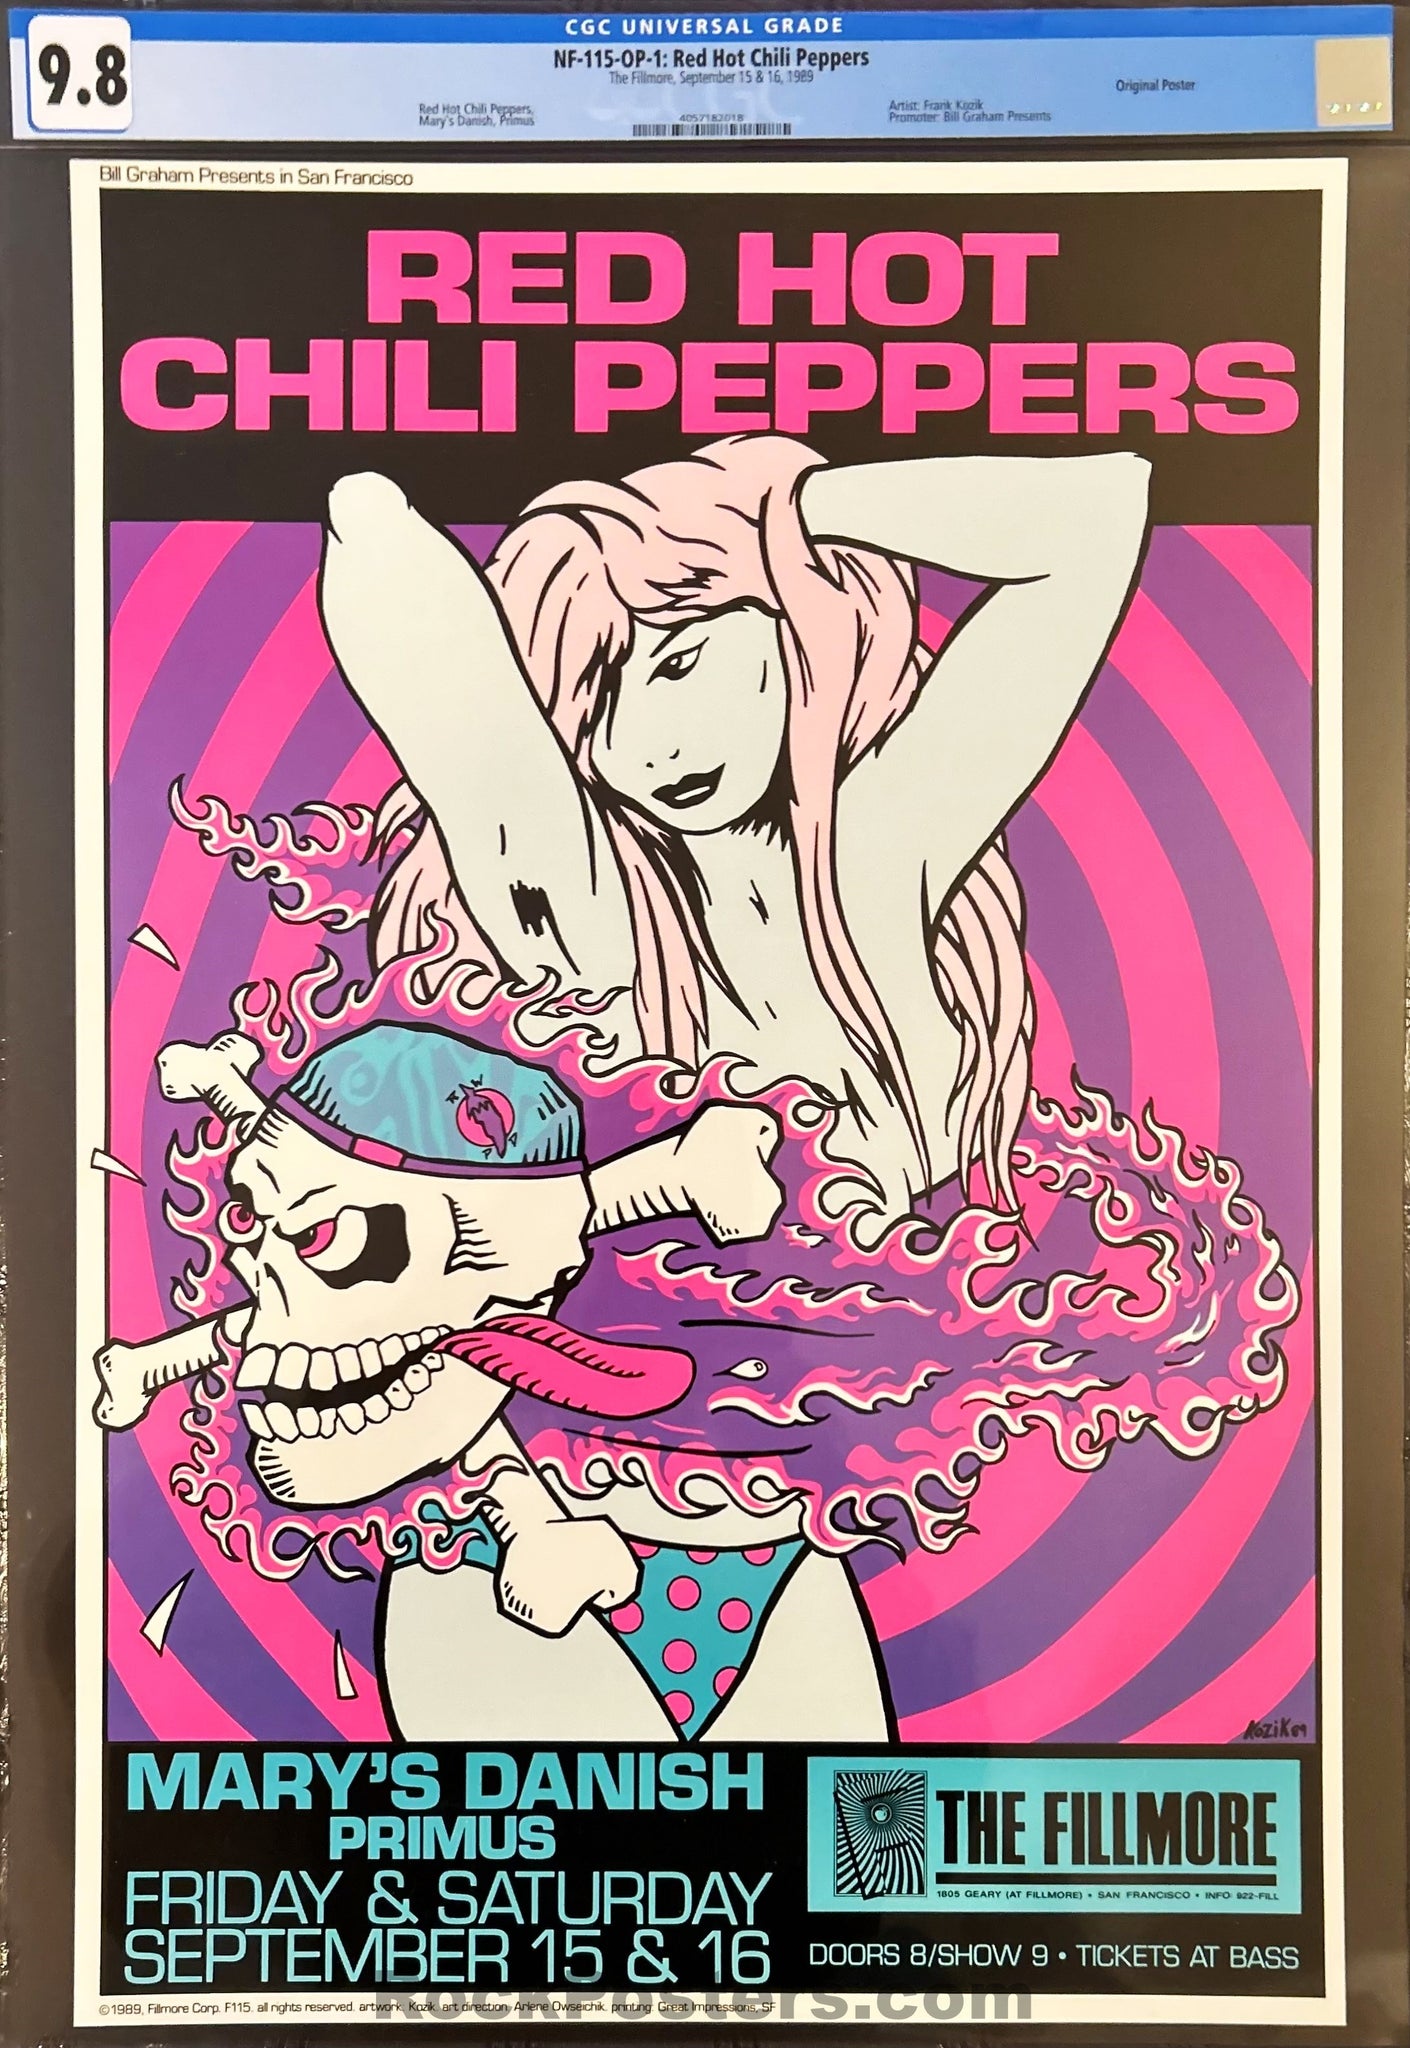 AUCTION - NF-115 - Red Hot Chili Peppers - Frank Kozik - 1989 Poster - Fillmore Auditorium - CGC Graded 9.8